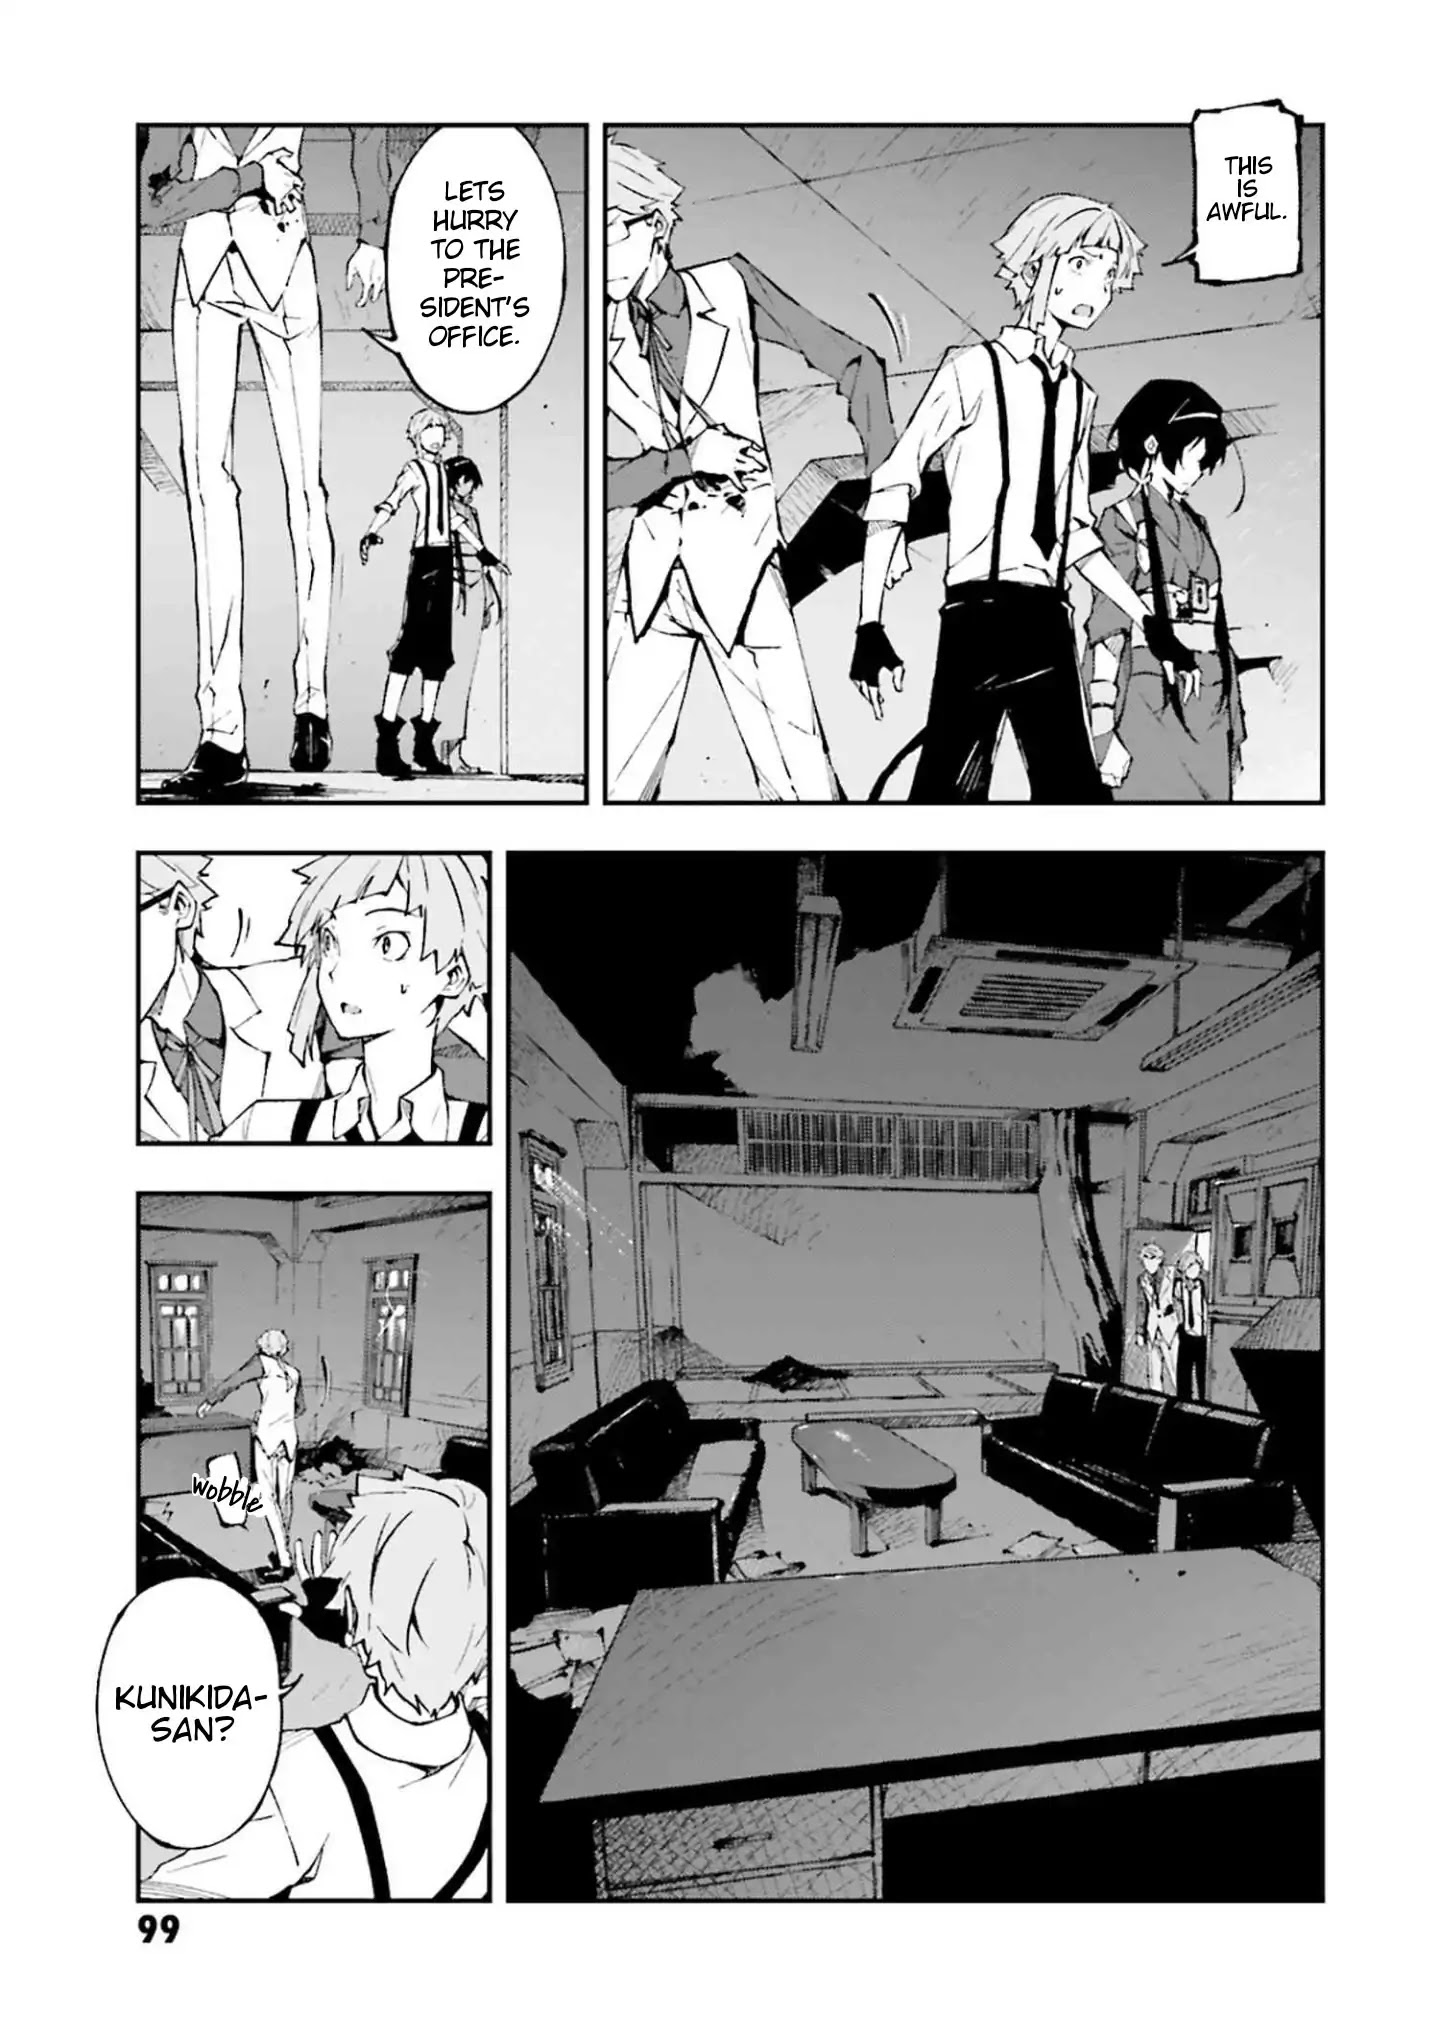 Bungou Stray Dogs: Dead Apple - Page 3